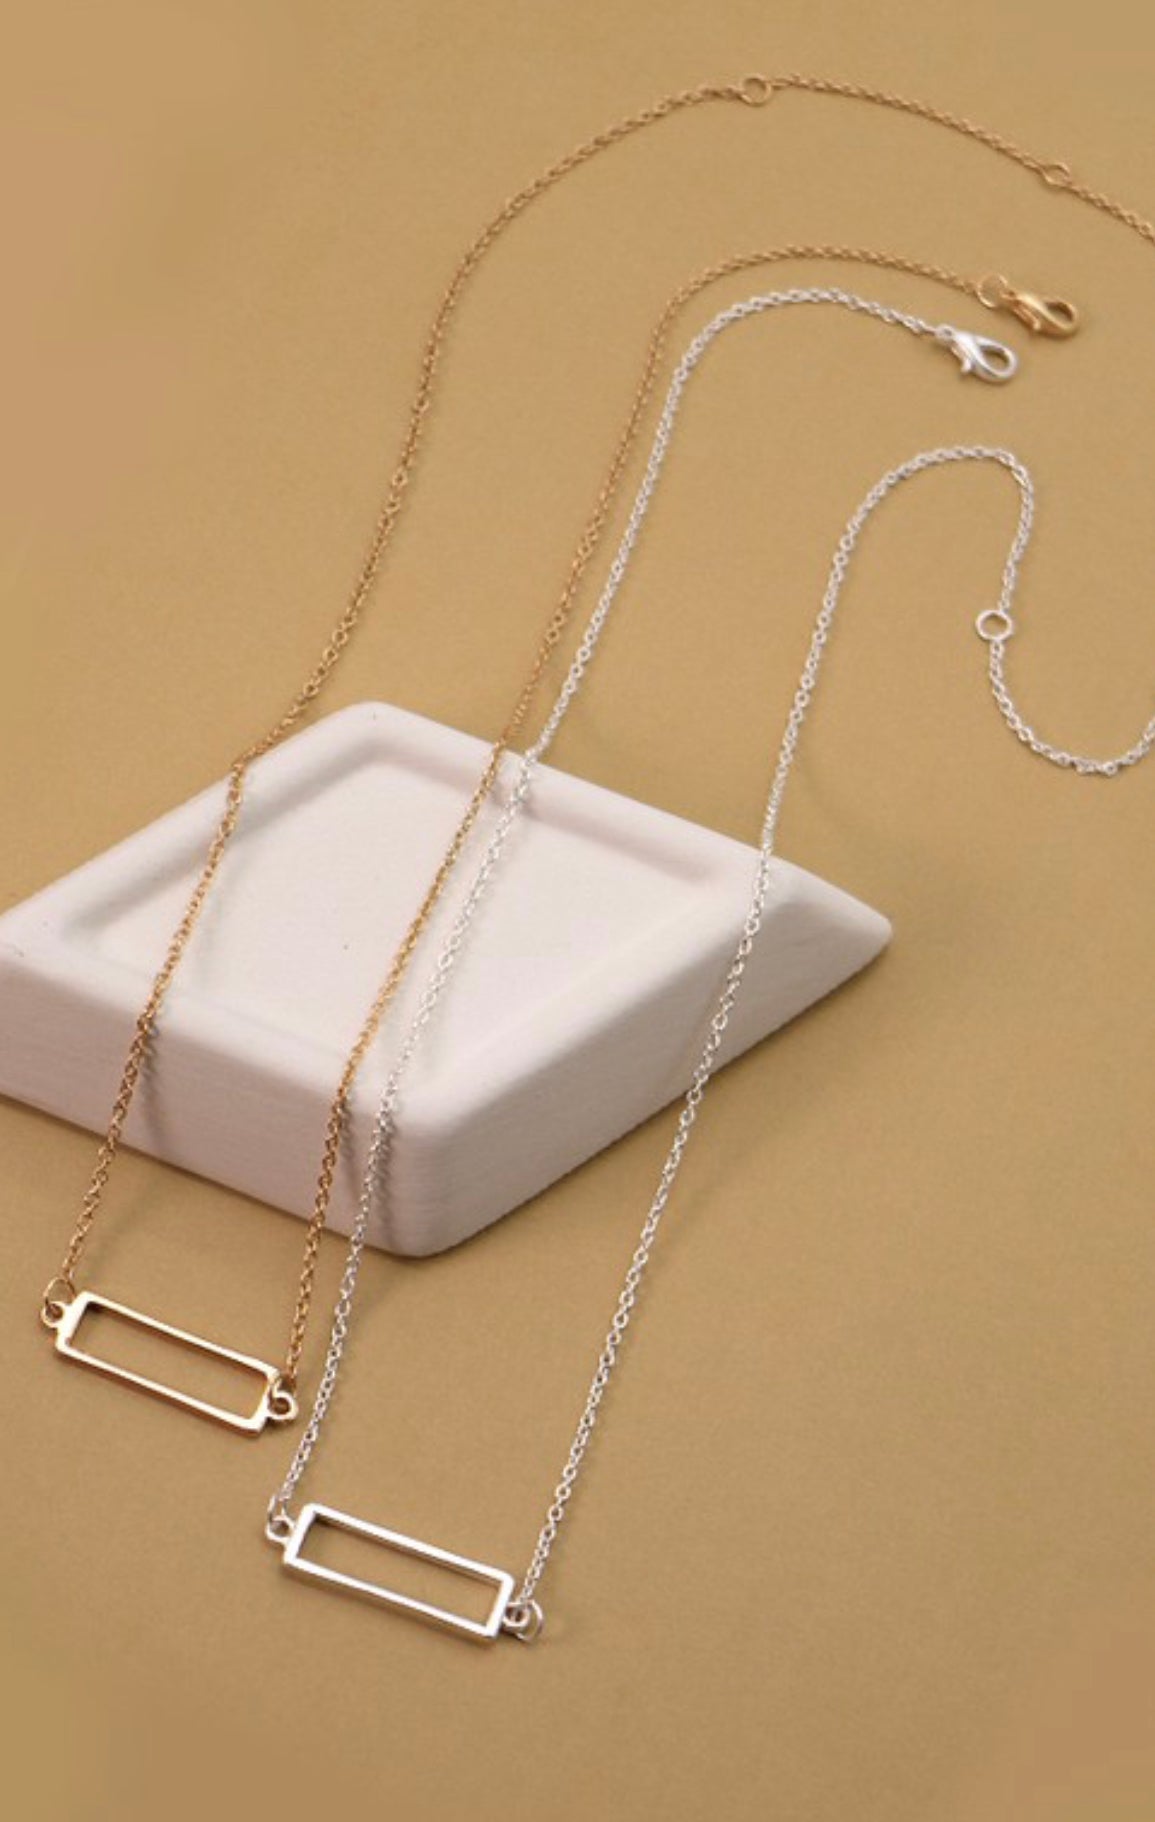 Keep It Simple Necklace